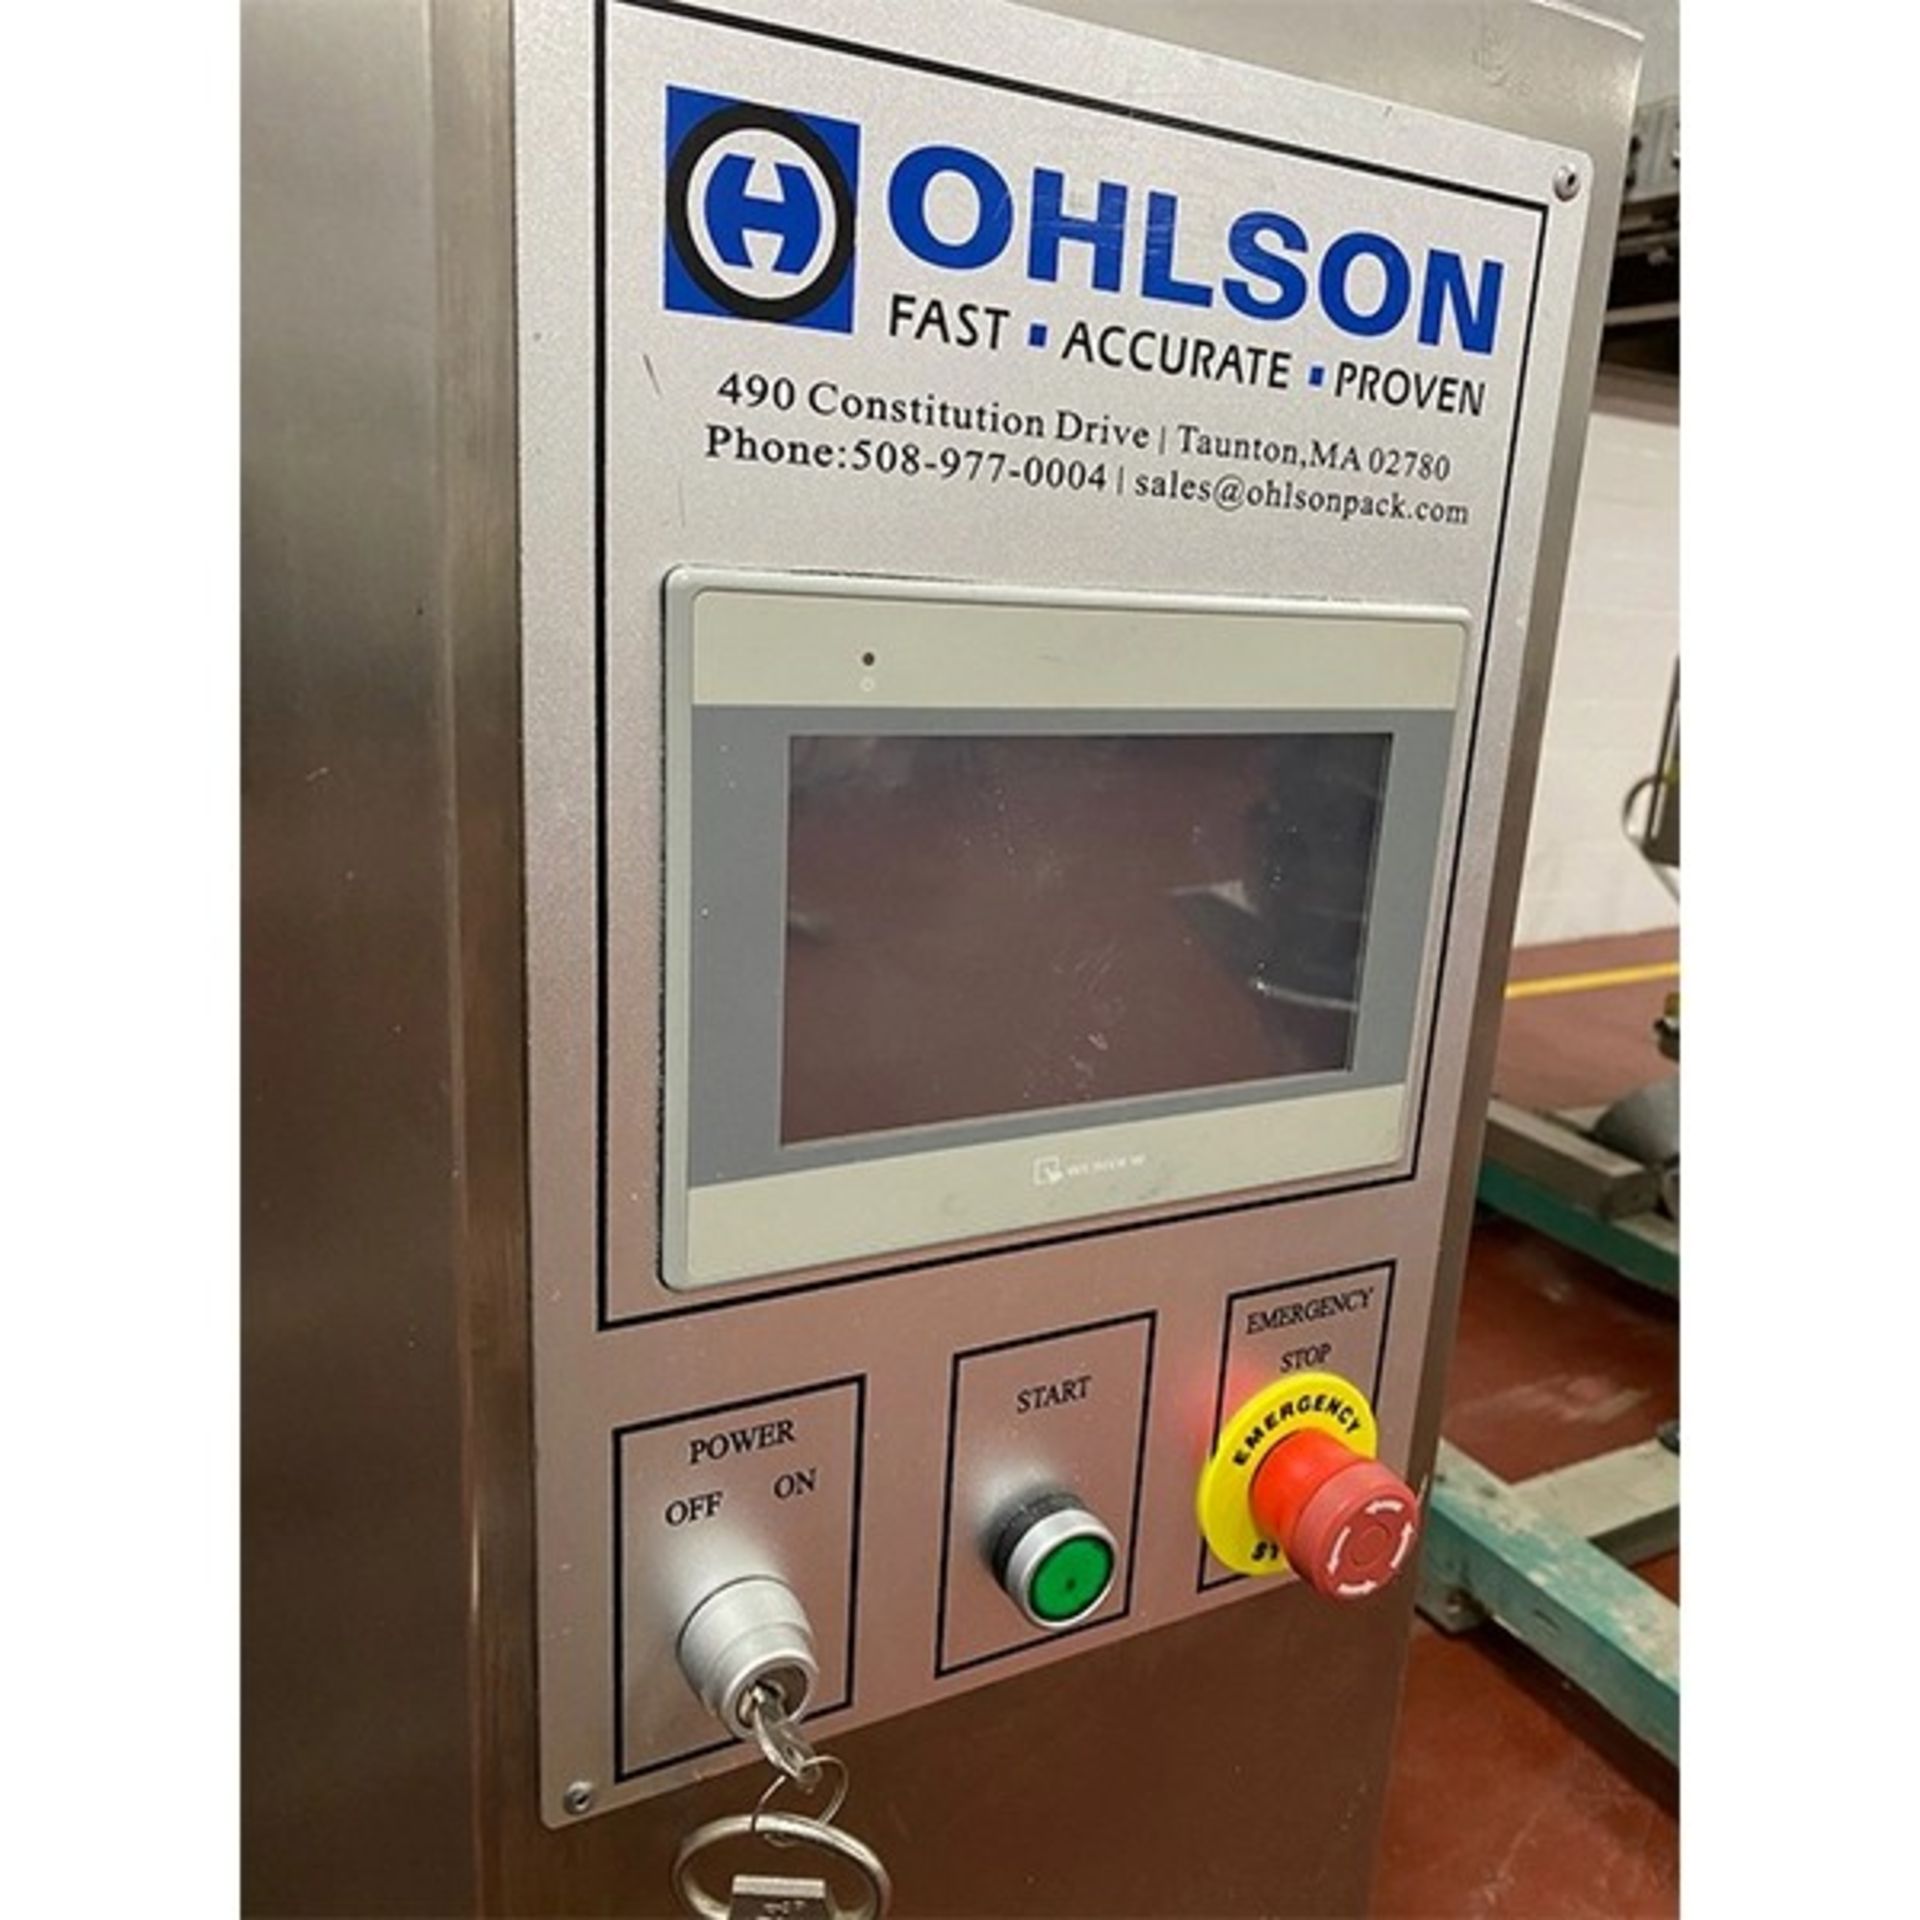 2018/2019 Ohlson Continuous Weighing and Vertical Form, Fill and Seal System includes - Image 6 of 13